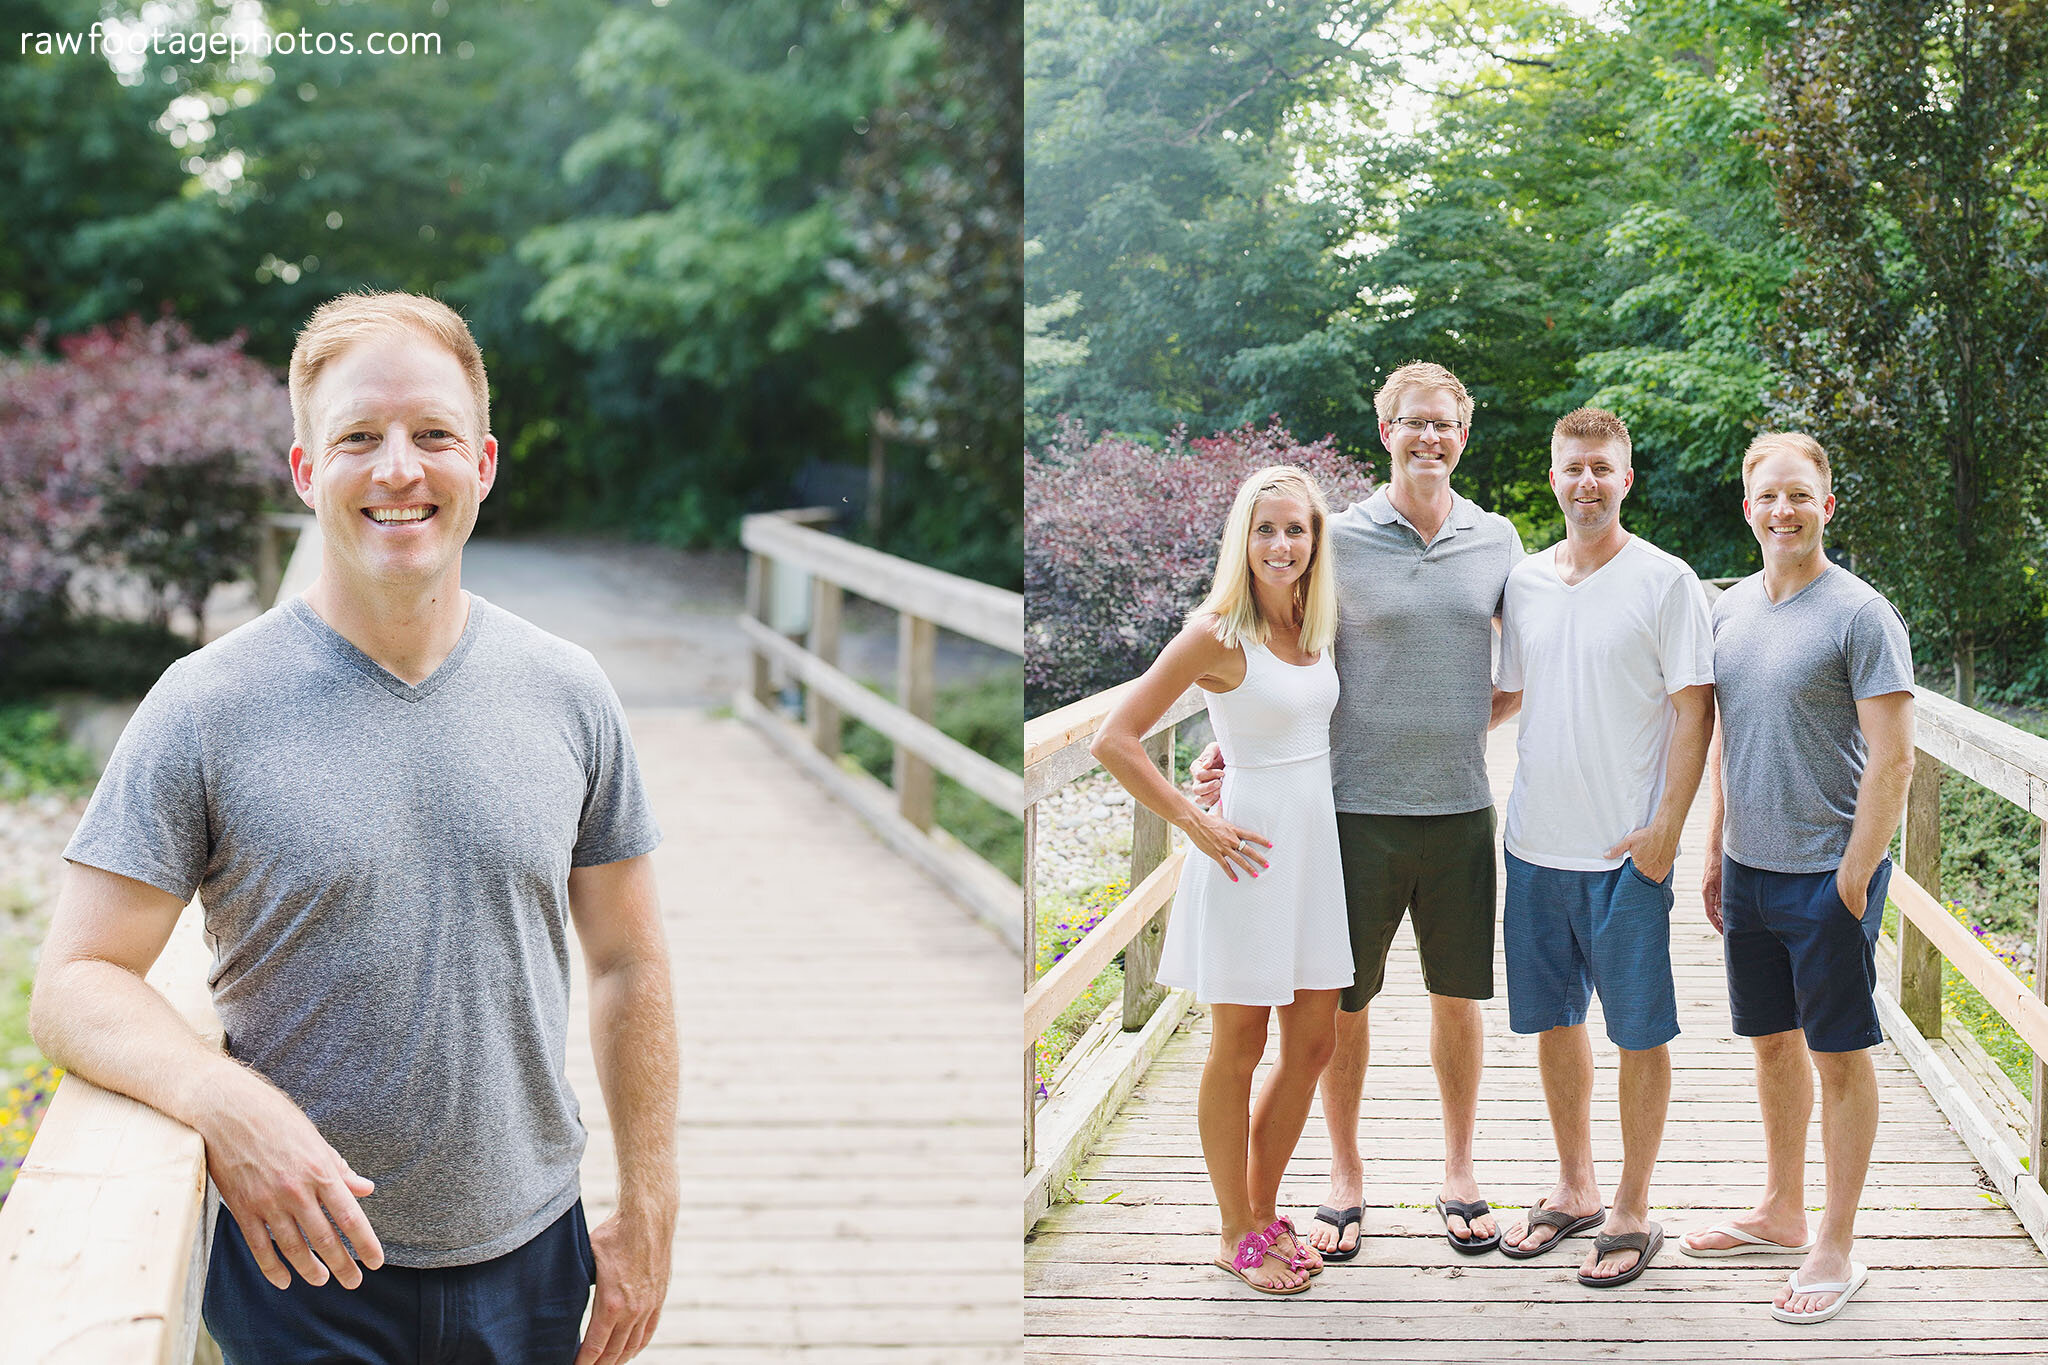 london_ontario_family_photographer-extended_family_session-grandparents-cousins-backyard_session-civic_gardens-raw_footage_photography-035.jpg